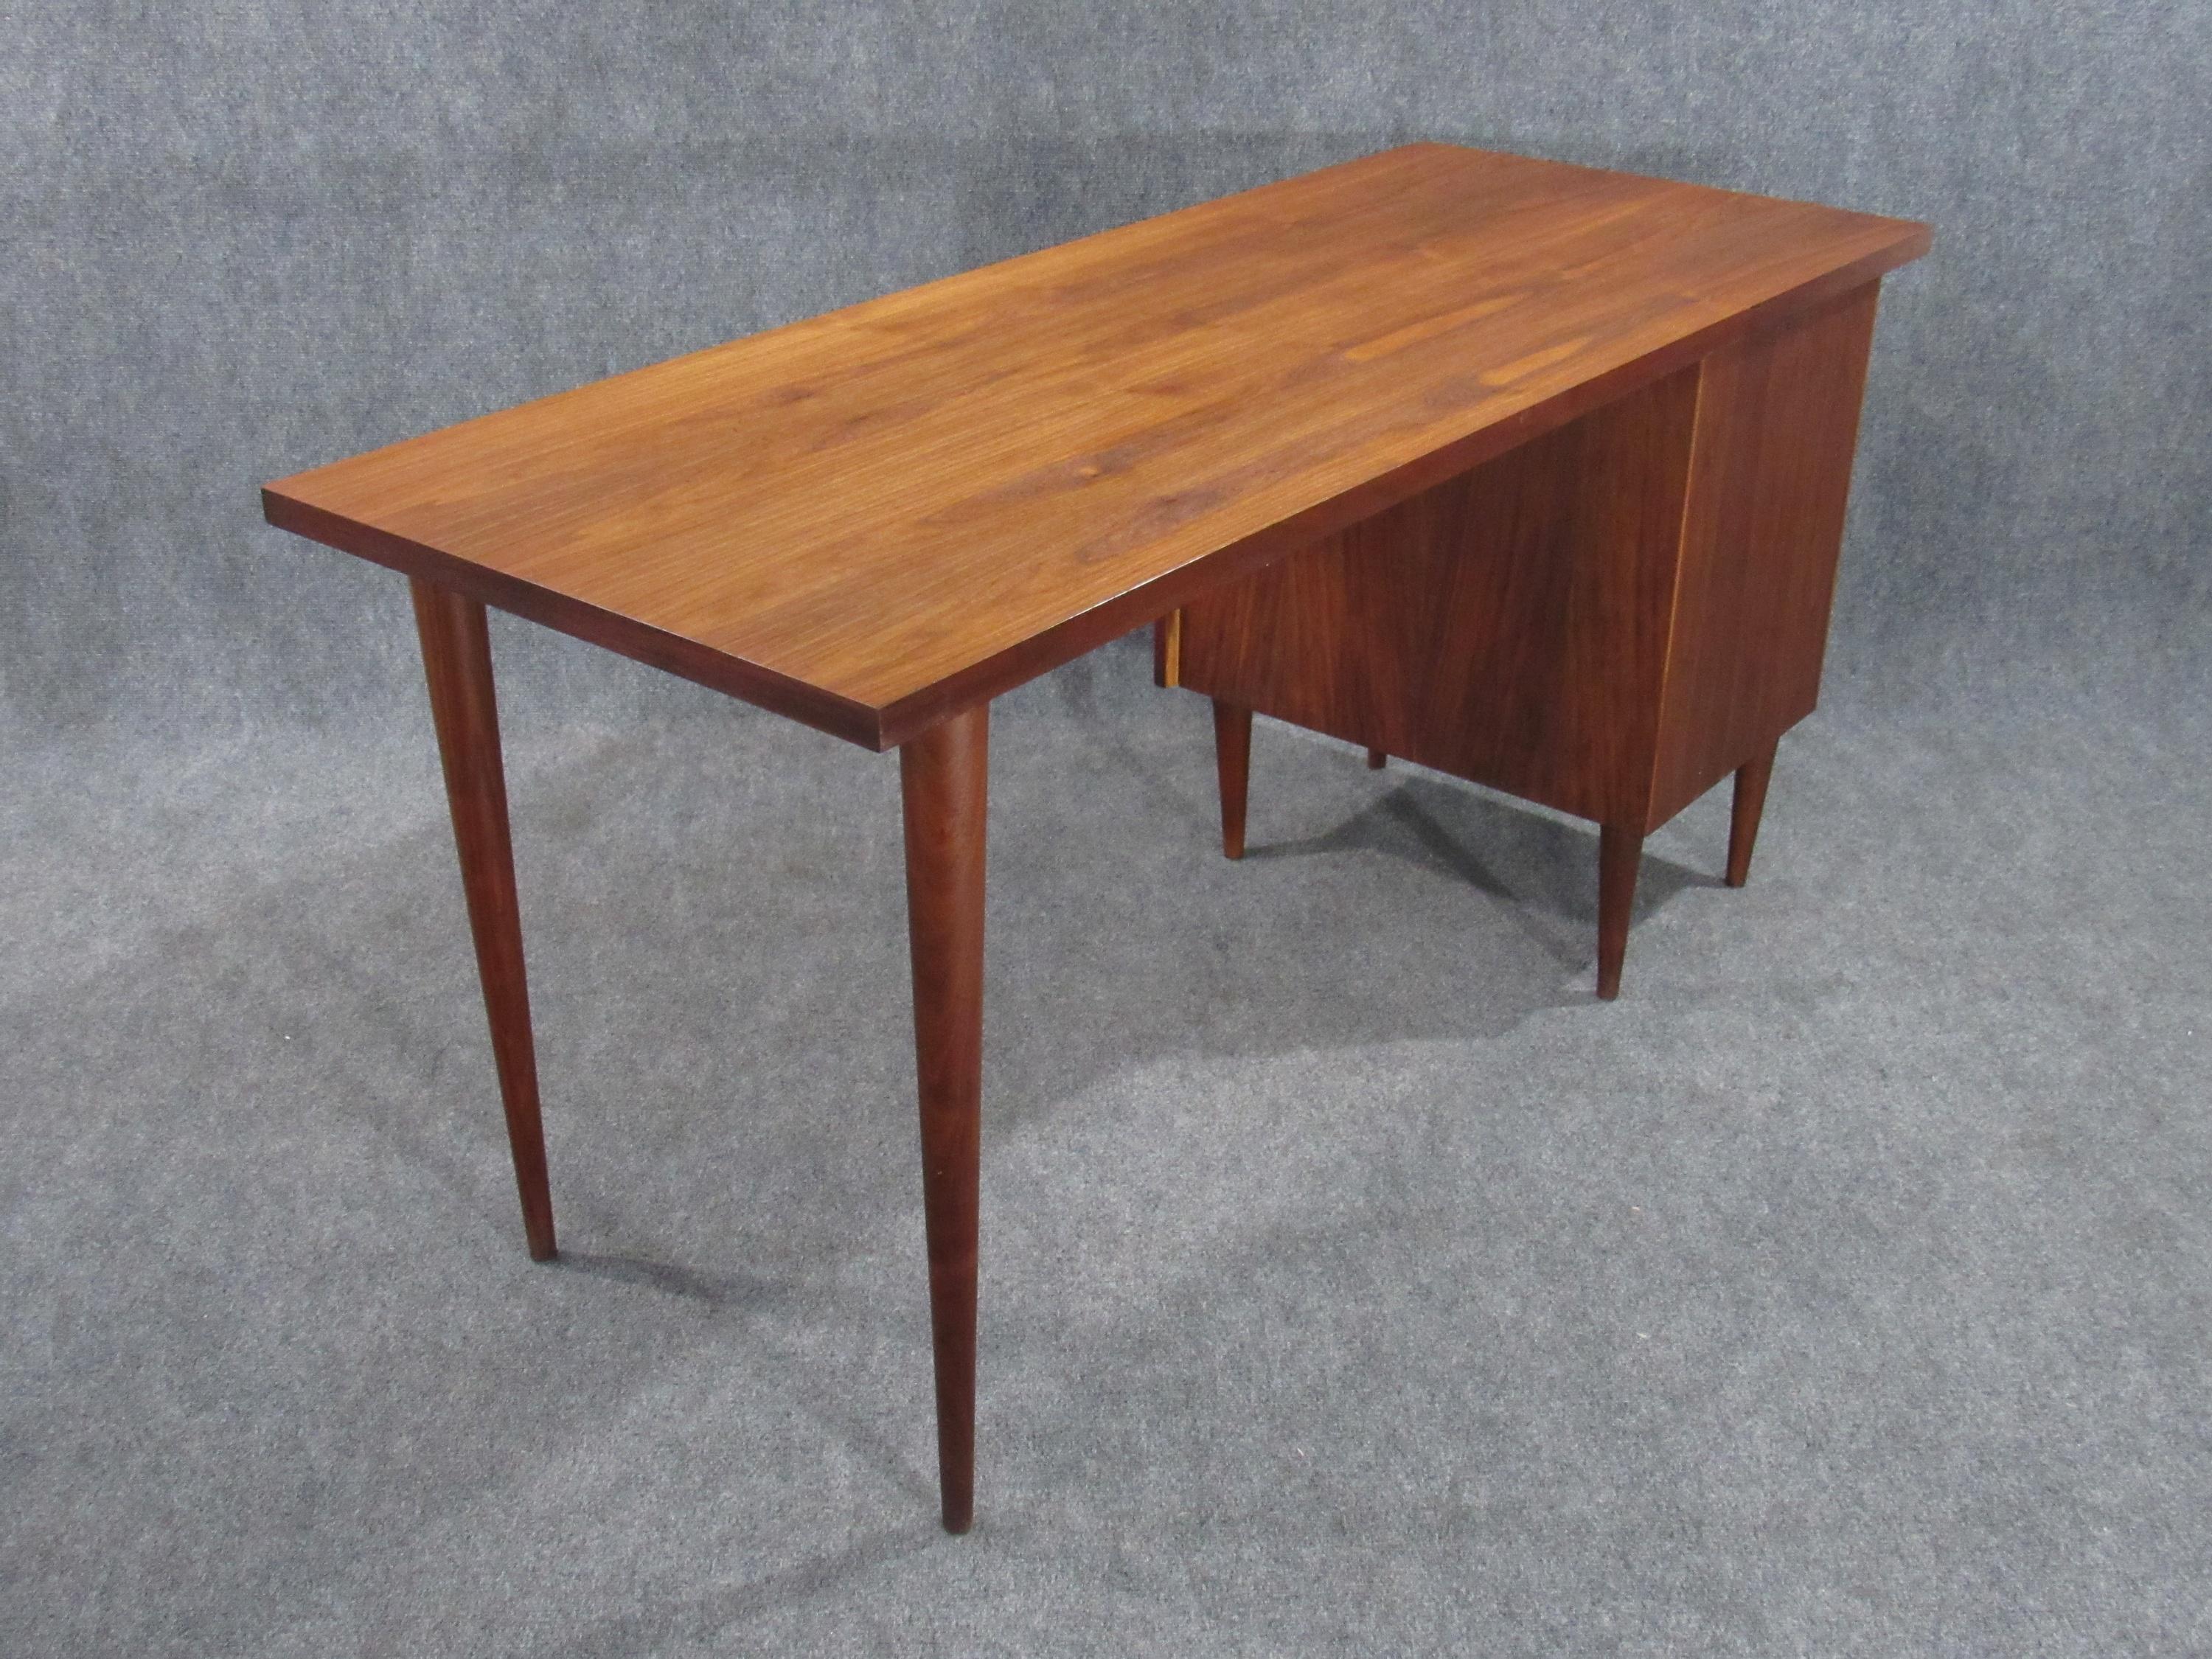 North American Mid-Century Modern Walnut Small Desk by Ben Thompson for Design Research For Sale